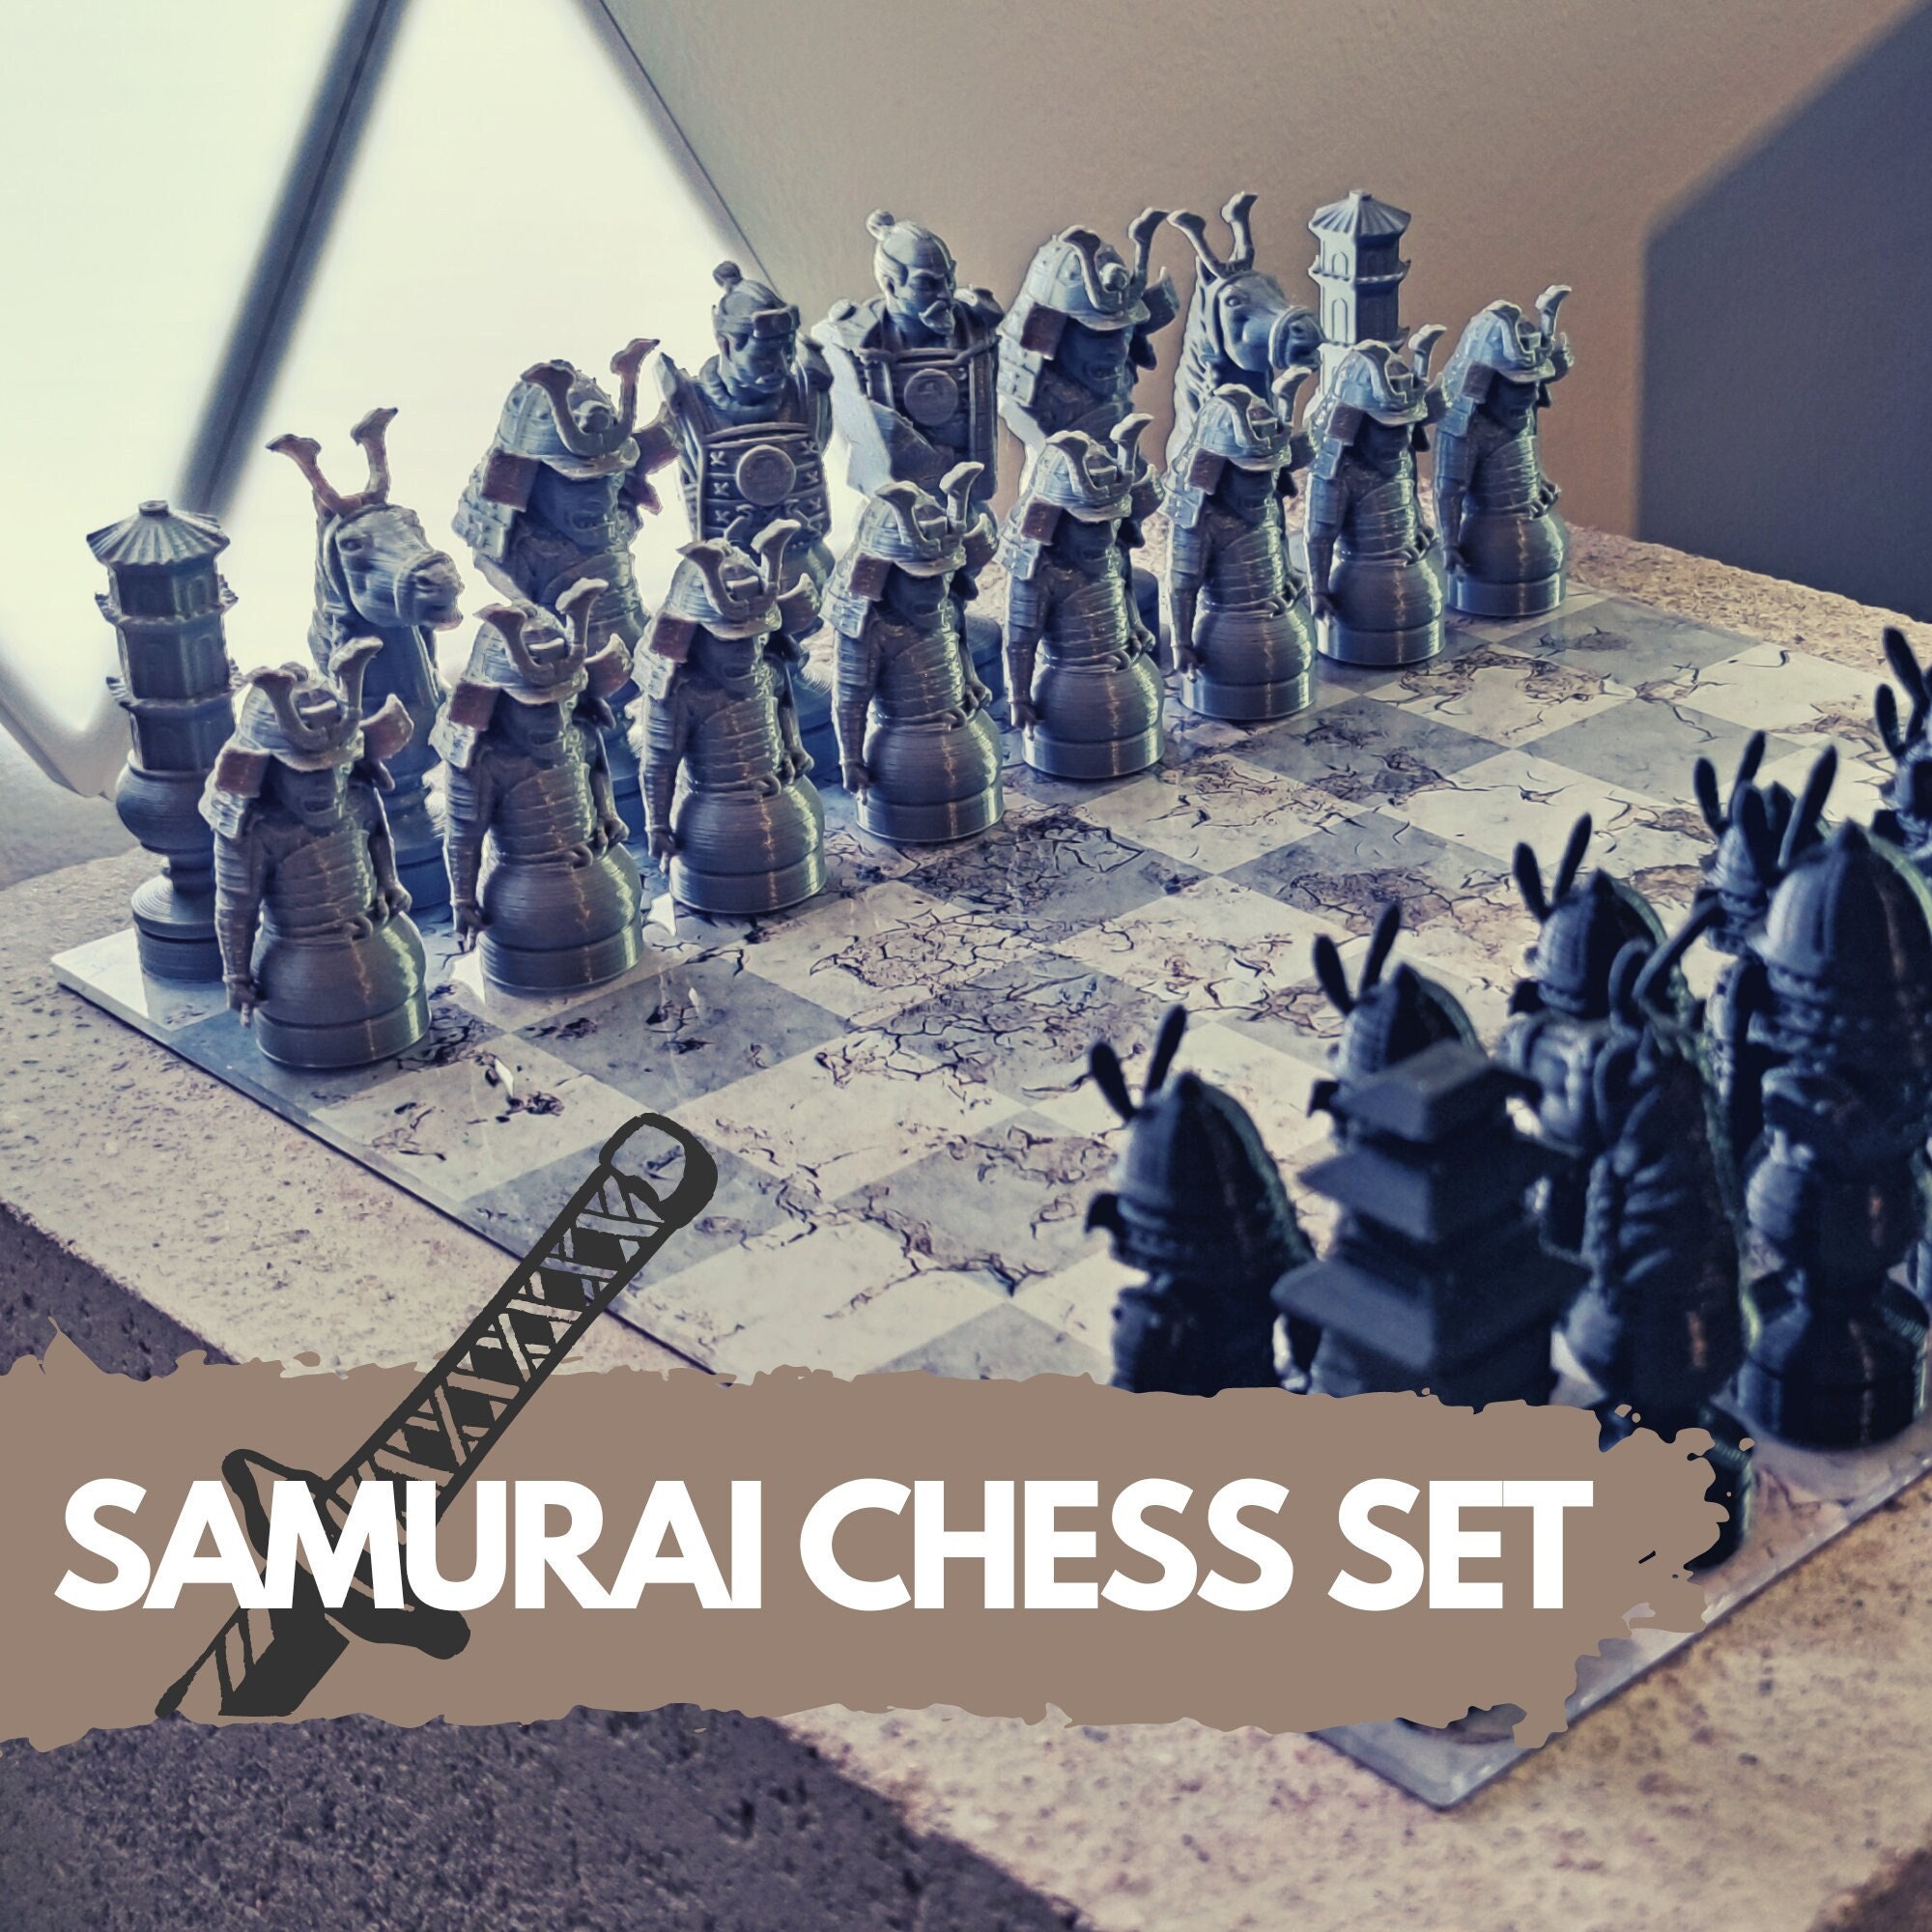 In Uc Browser Japani Sex Video - Samurai Chess Set in Black Gray Including Figures and Acrylic - Etsy